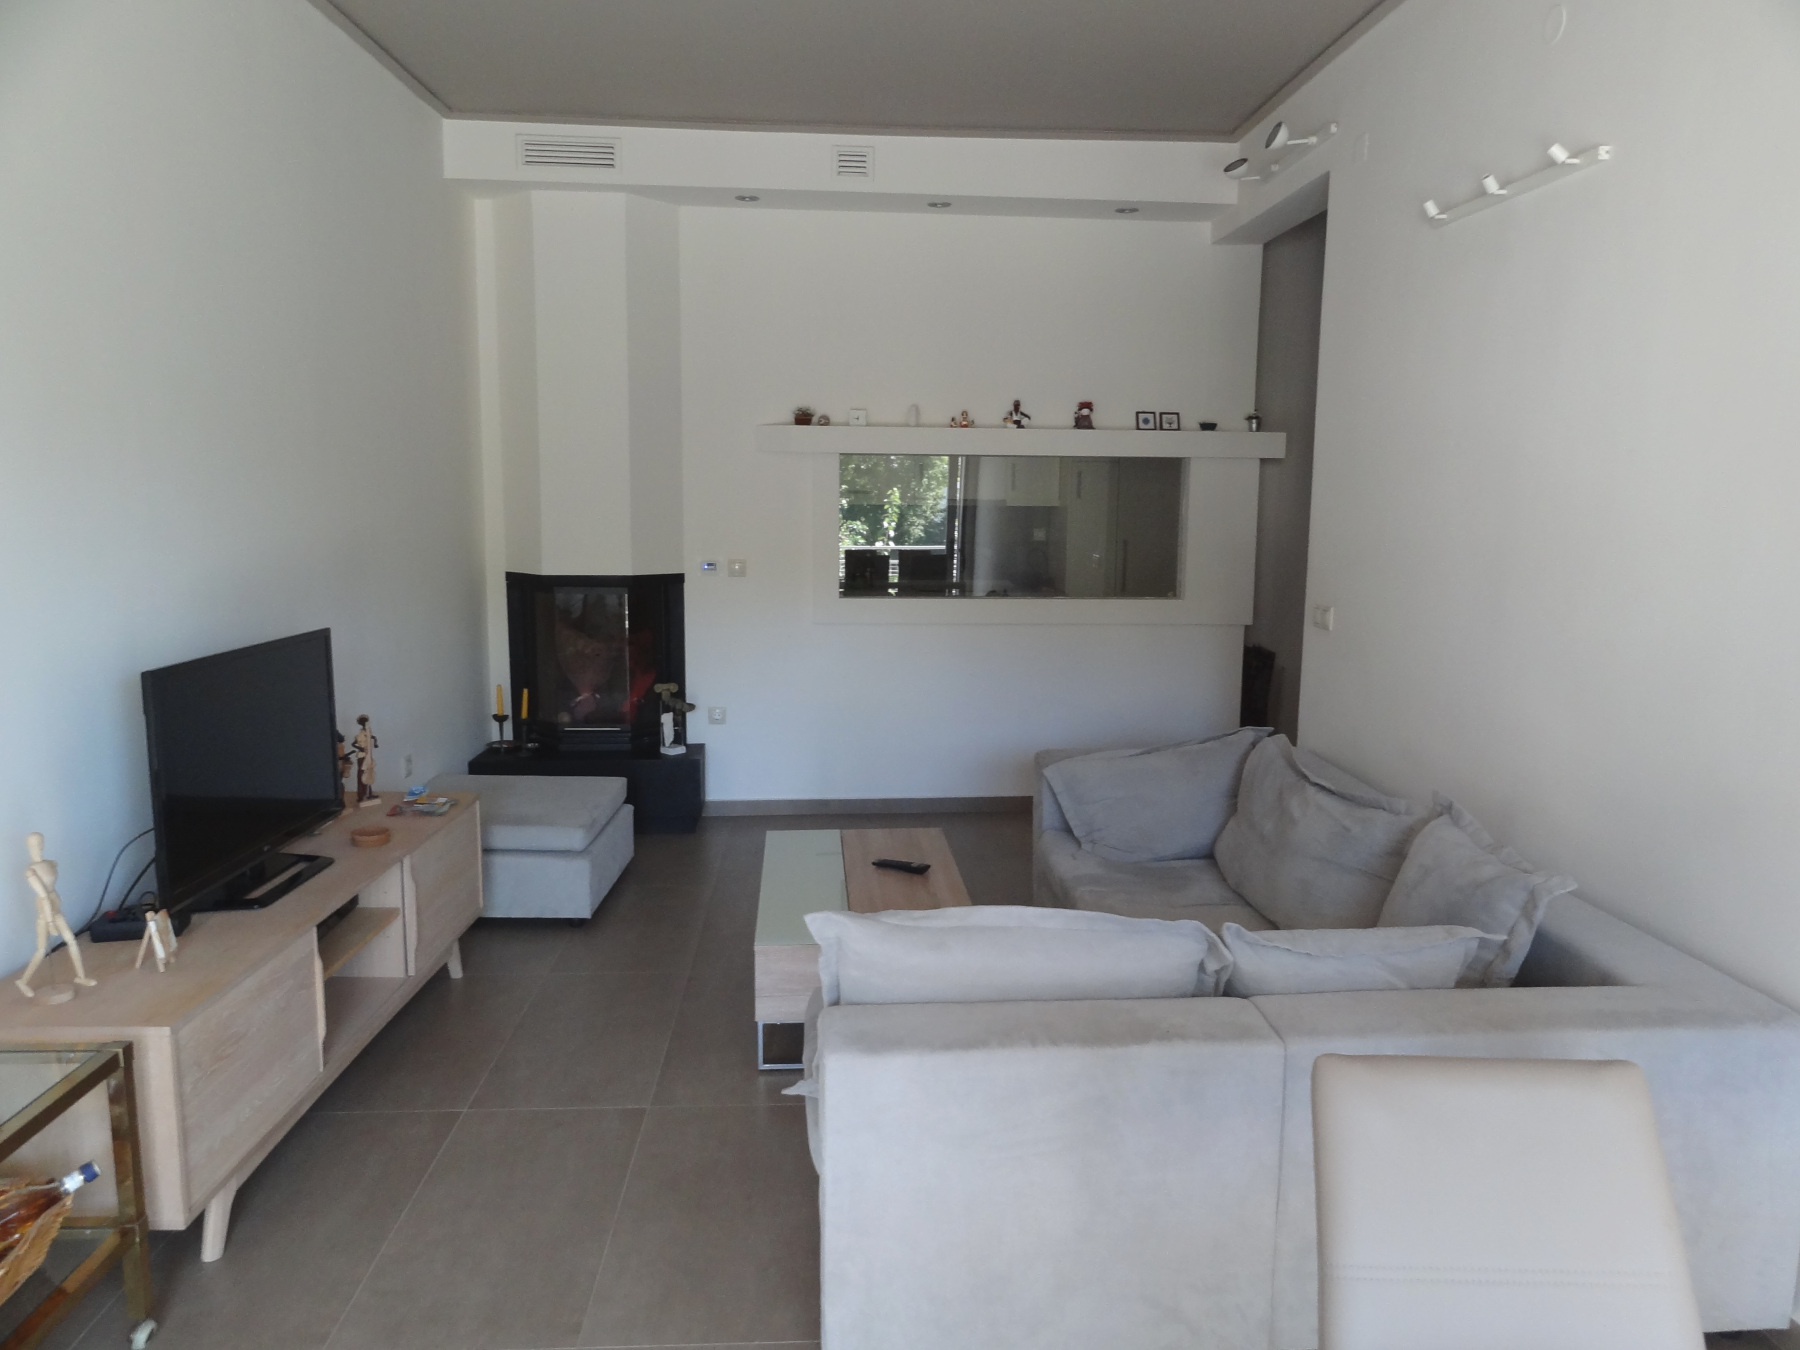 For rent bright furnished 2 bedrooms apartment 90 sq.m. 3rd floor in the center of Ioannina near Dodoni Avenue